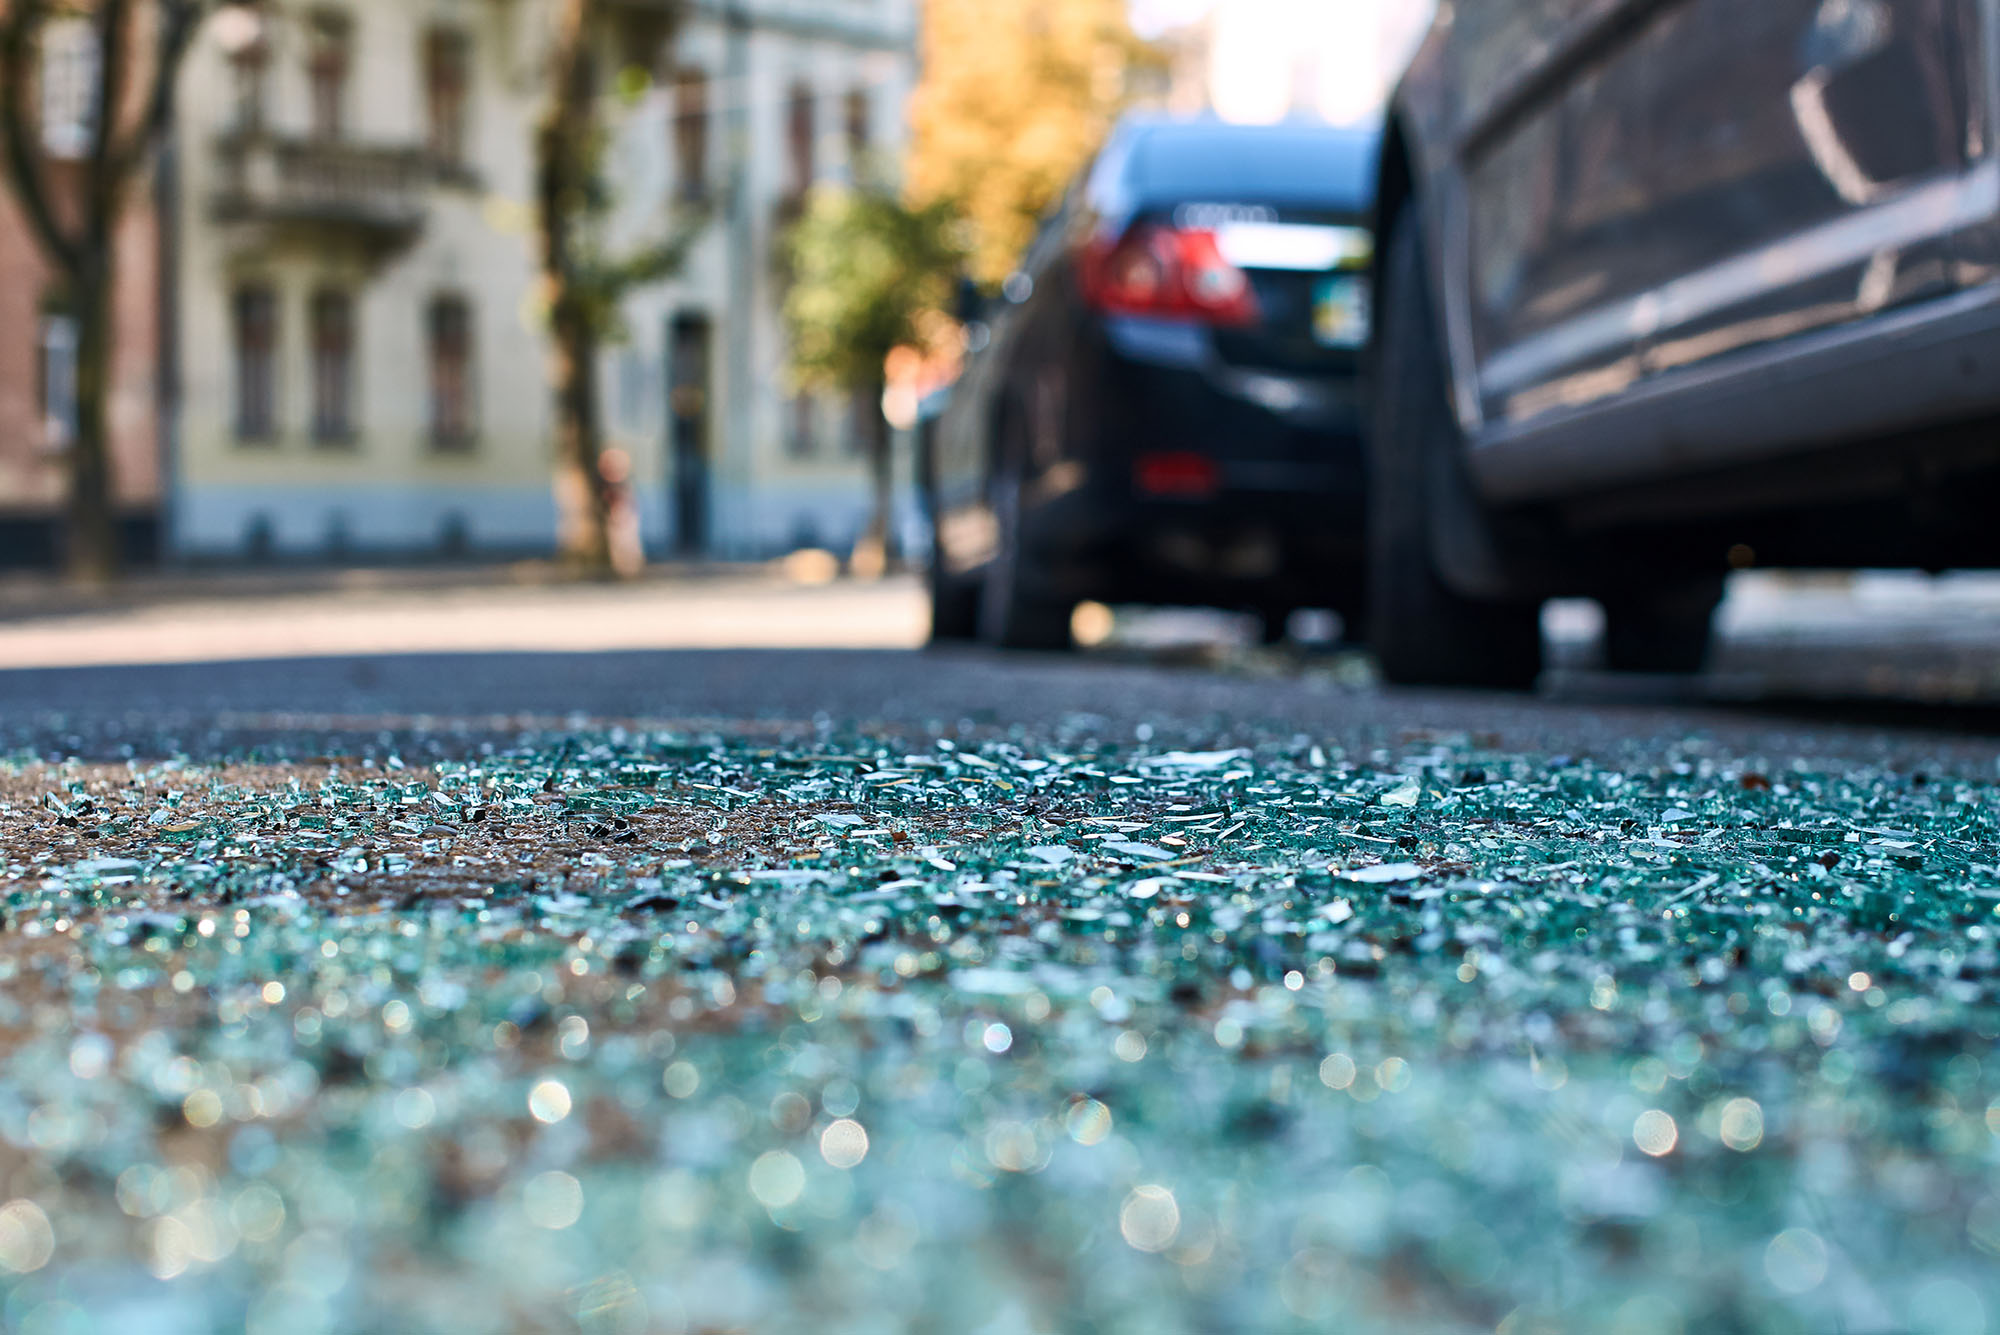 How many times a day do cars crash into buildings?